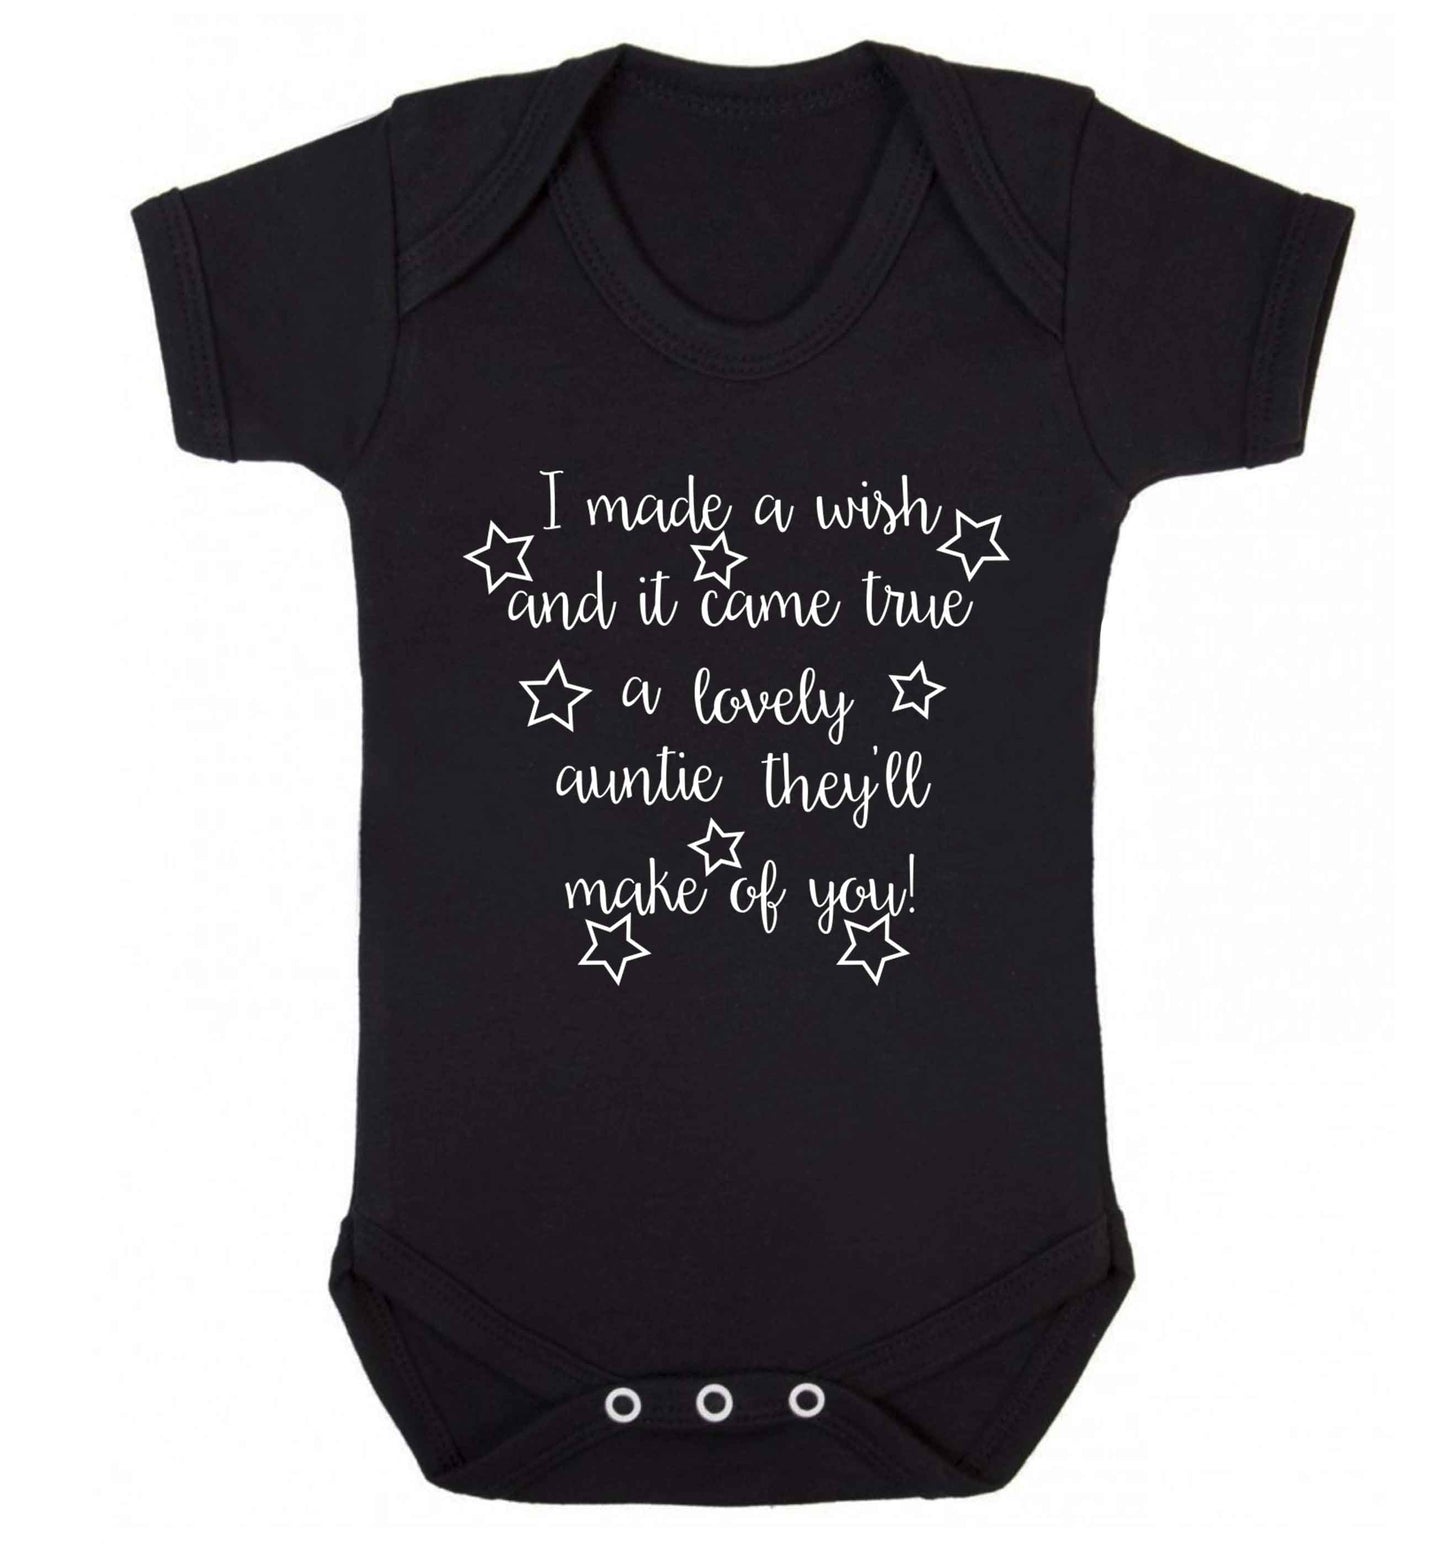 I made a wish and it came true a lovely auntie they'll make of you! Baby Vest black 18-24 months